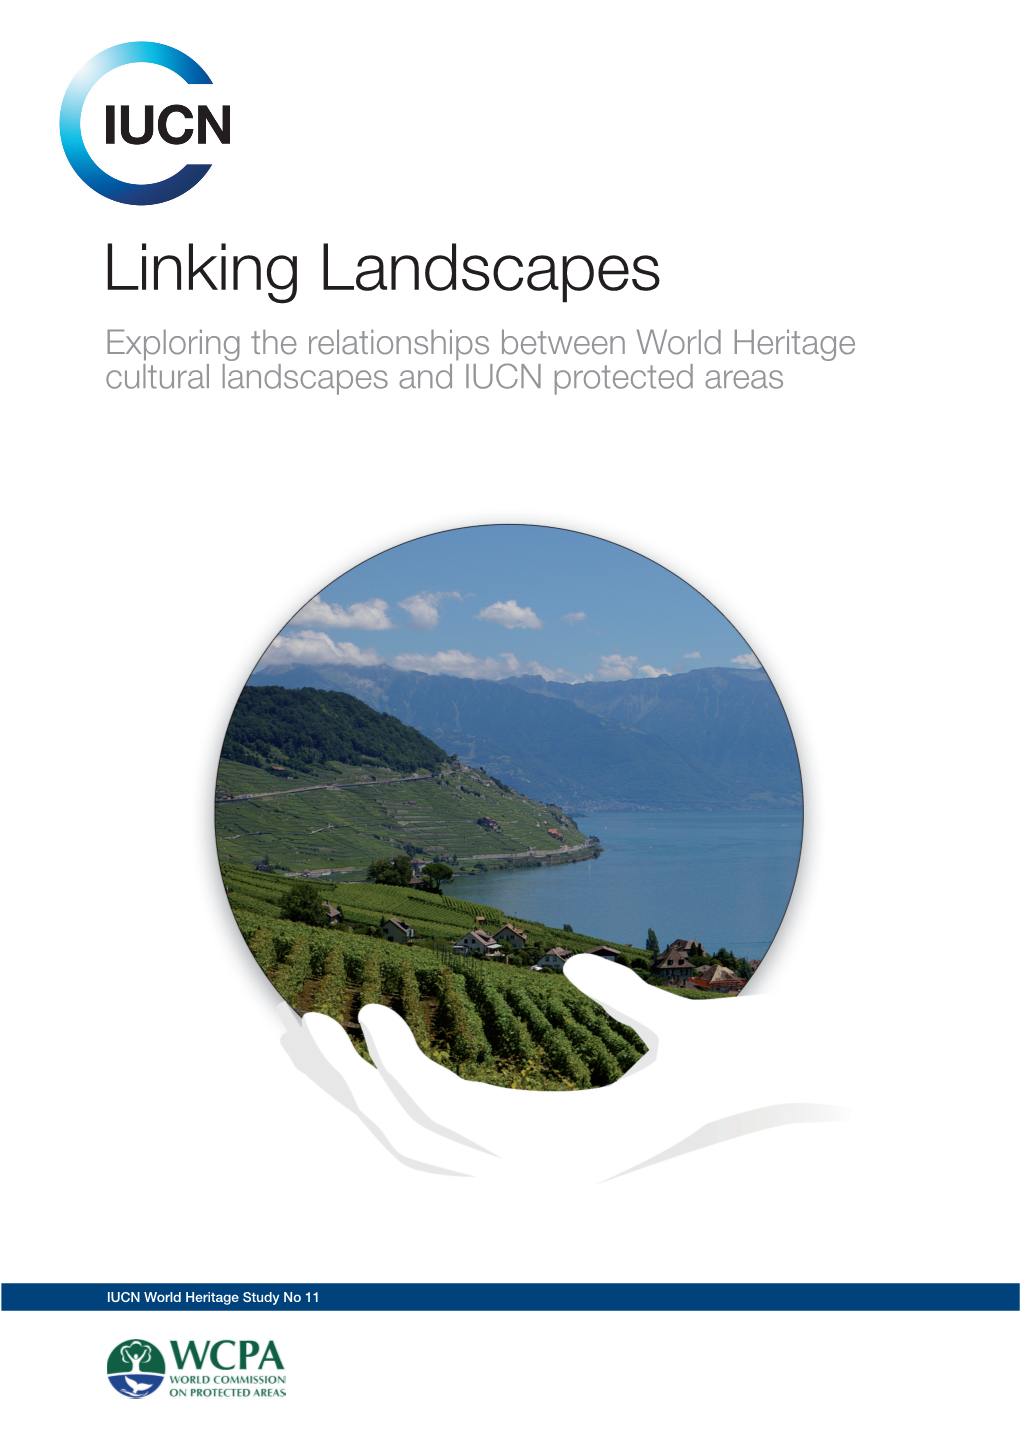 Linking Landscapes Exploring the Relationships Between World Heritage Cultural Landscapes and IUCN Protected Areas